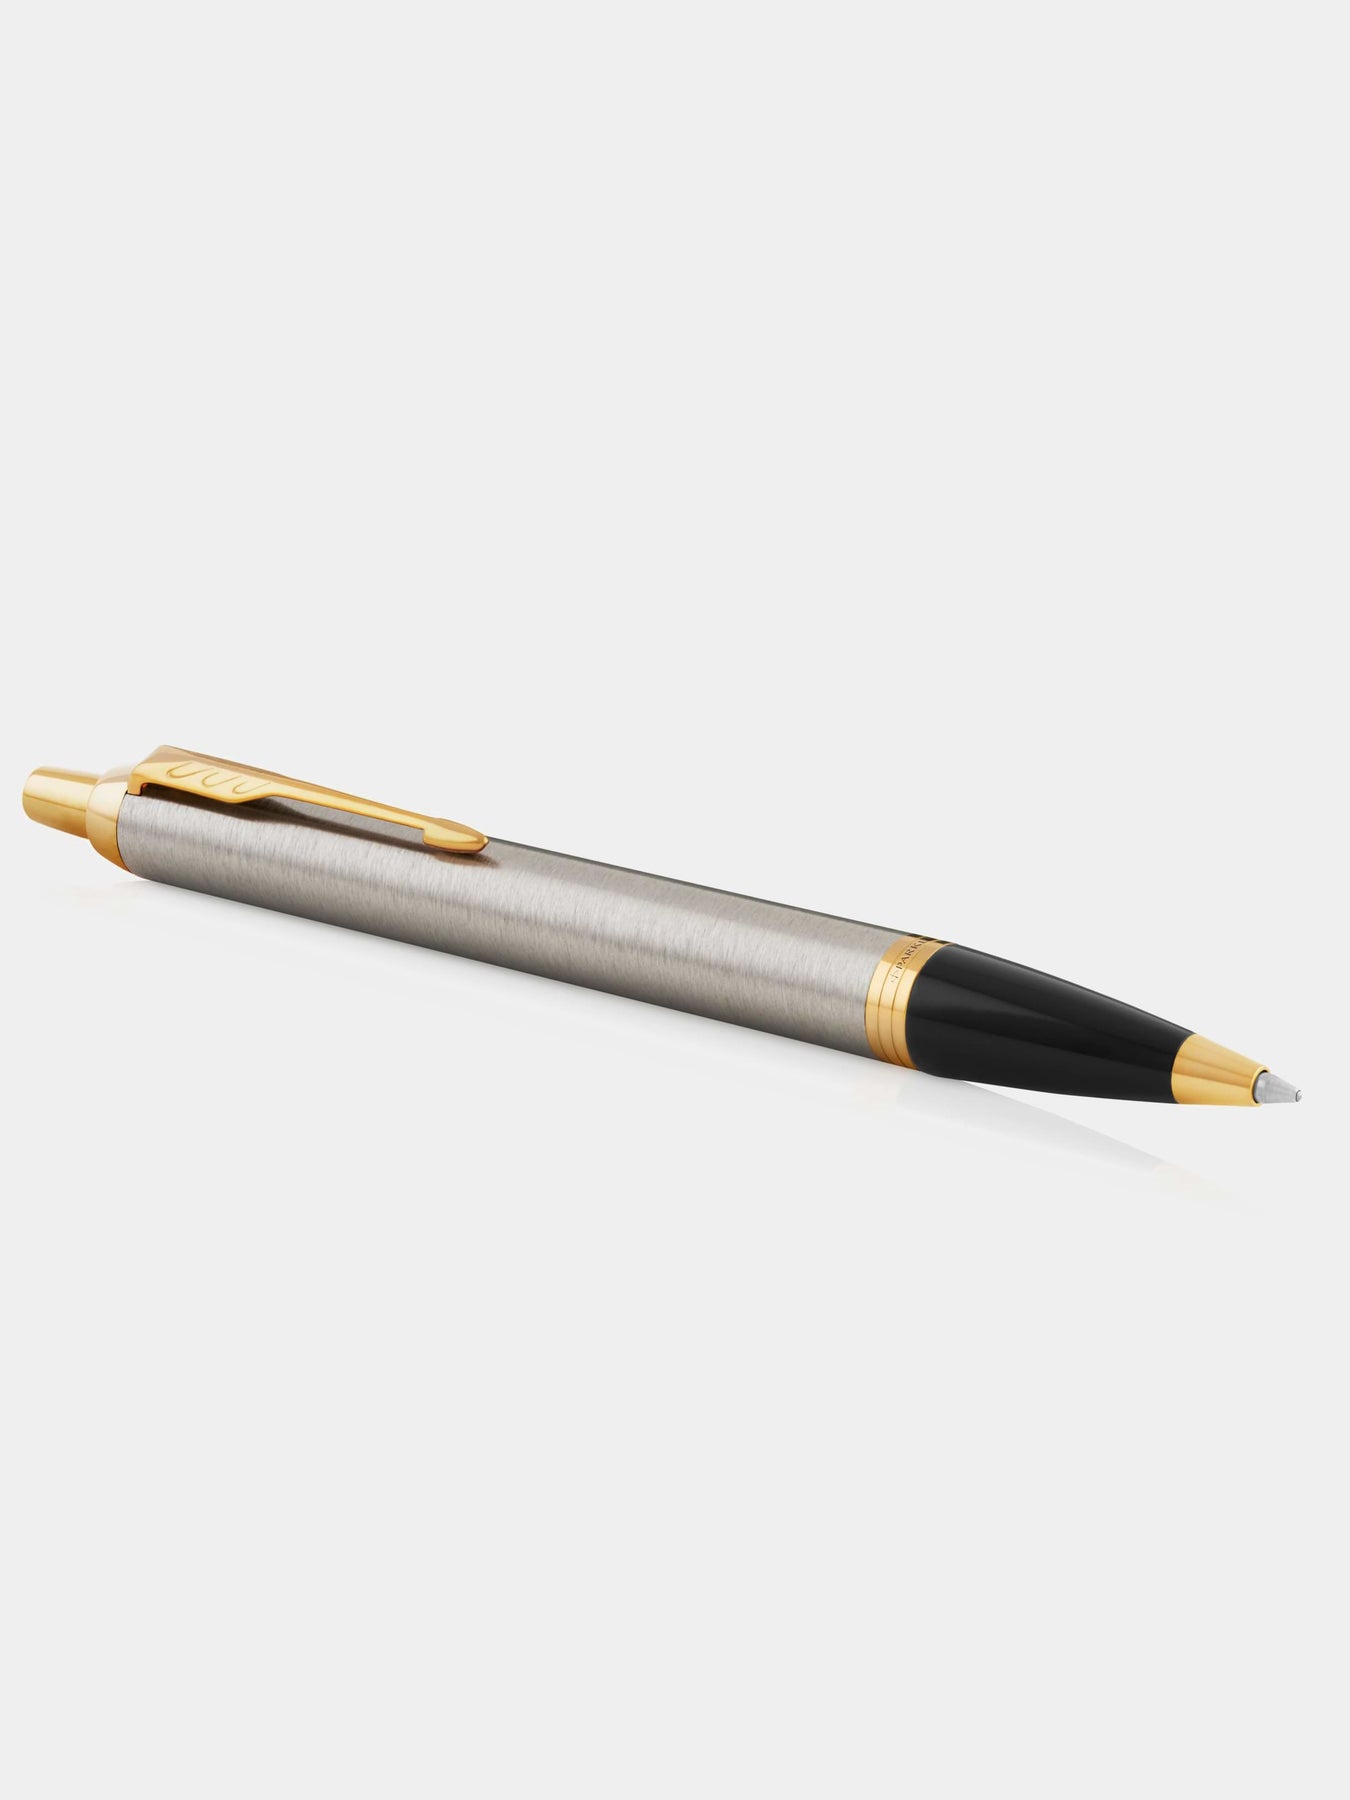 Parker IM Brushed Metal GT Ballpoint Pen – Individuated